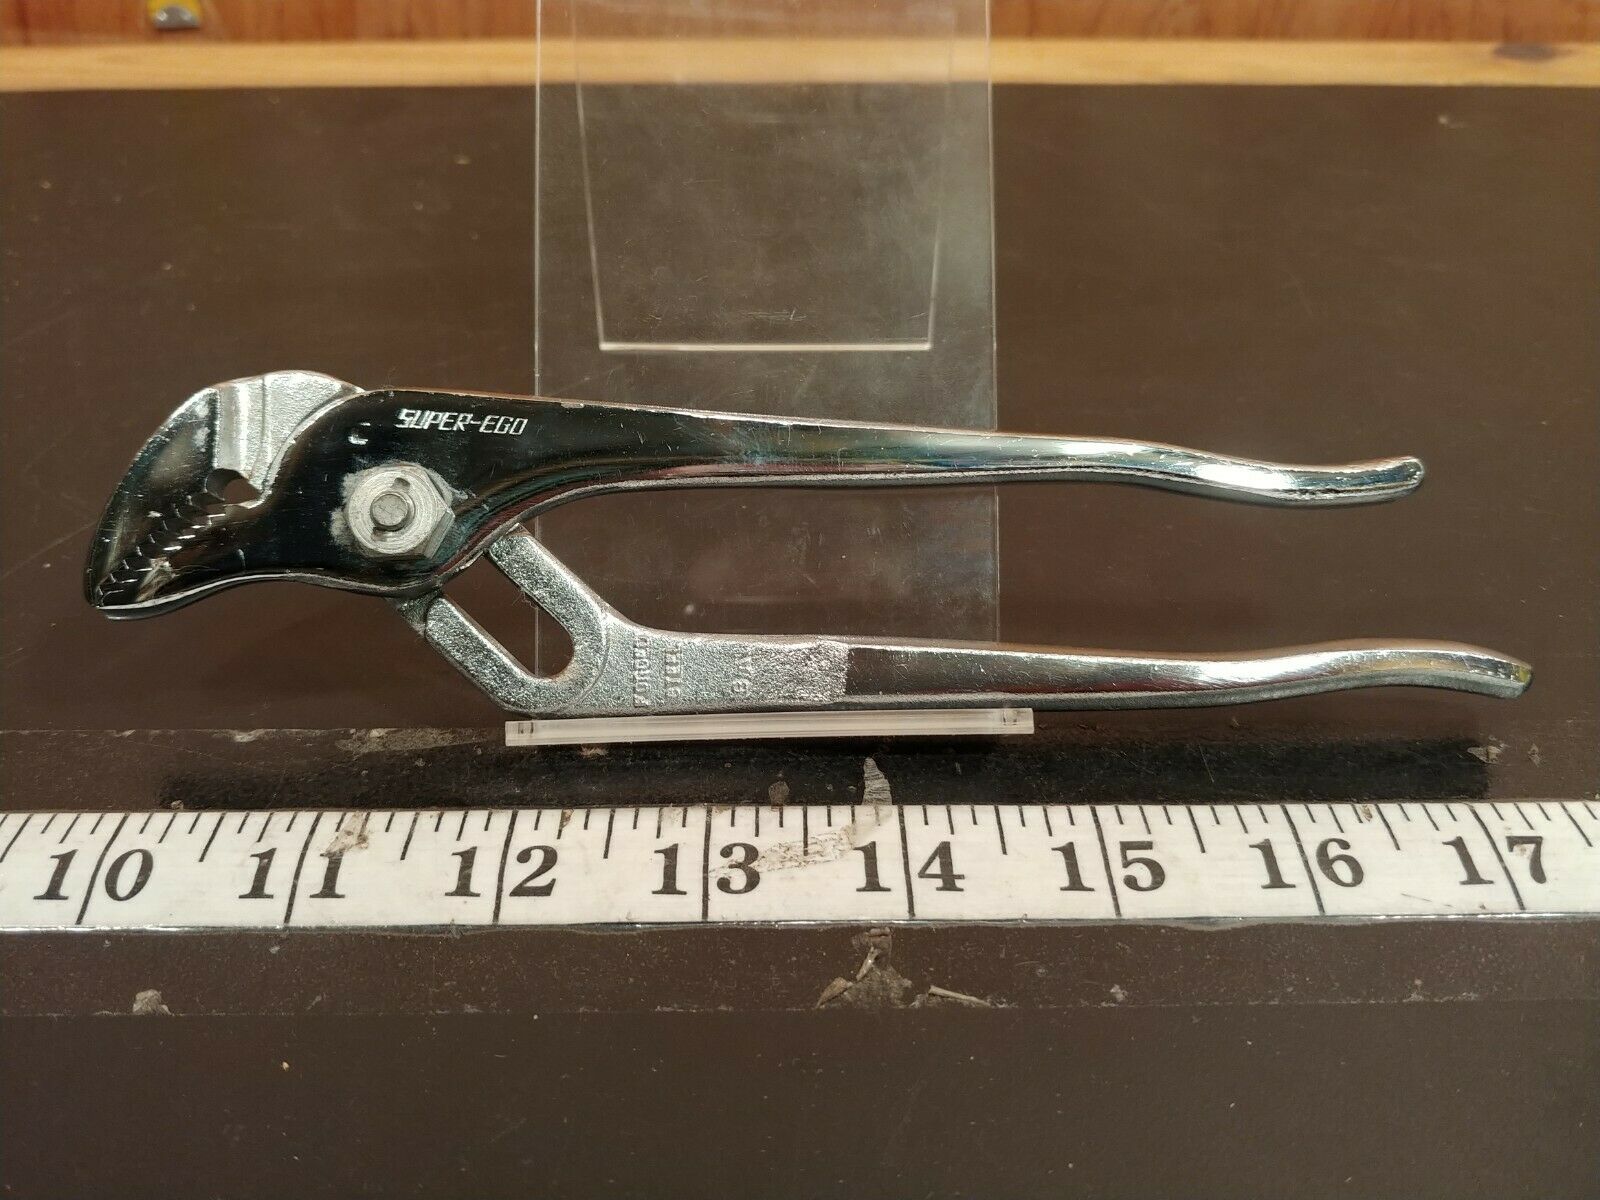 Super-ego 16" Adjustable Pliers Wrench Tool Alloy Steel Made In Spain 649104